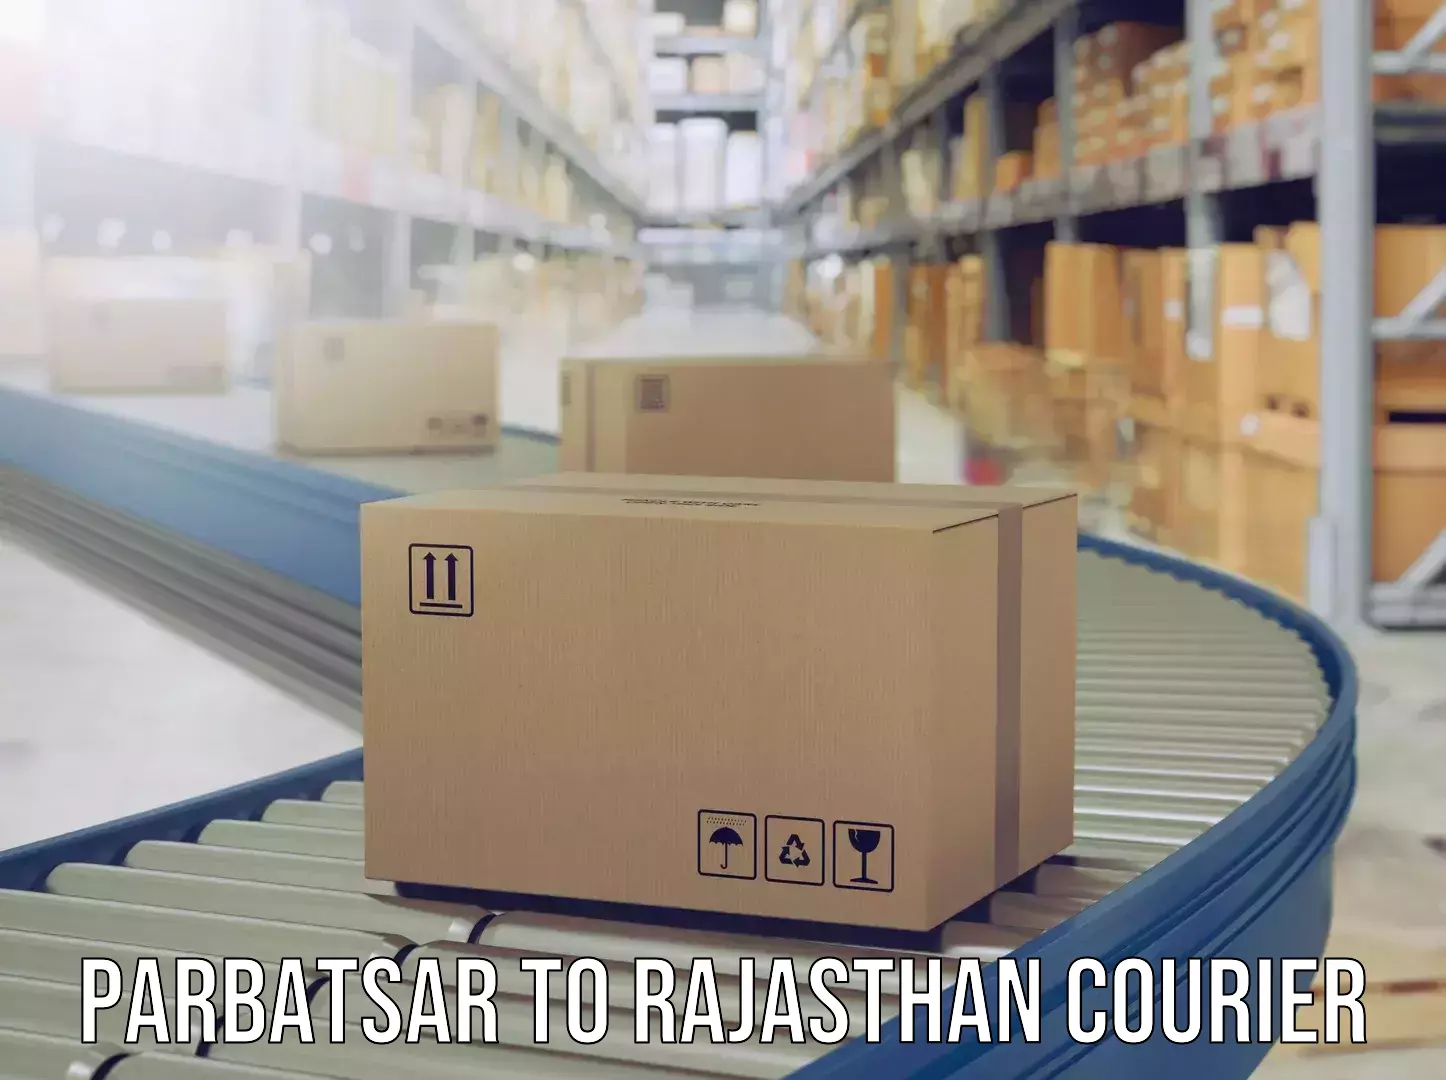 Luggage transport consulting Parbatsar to Banar